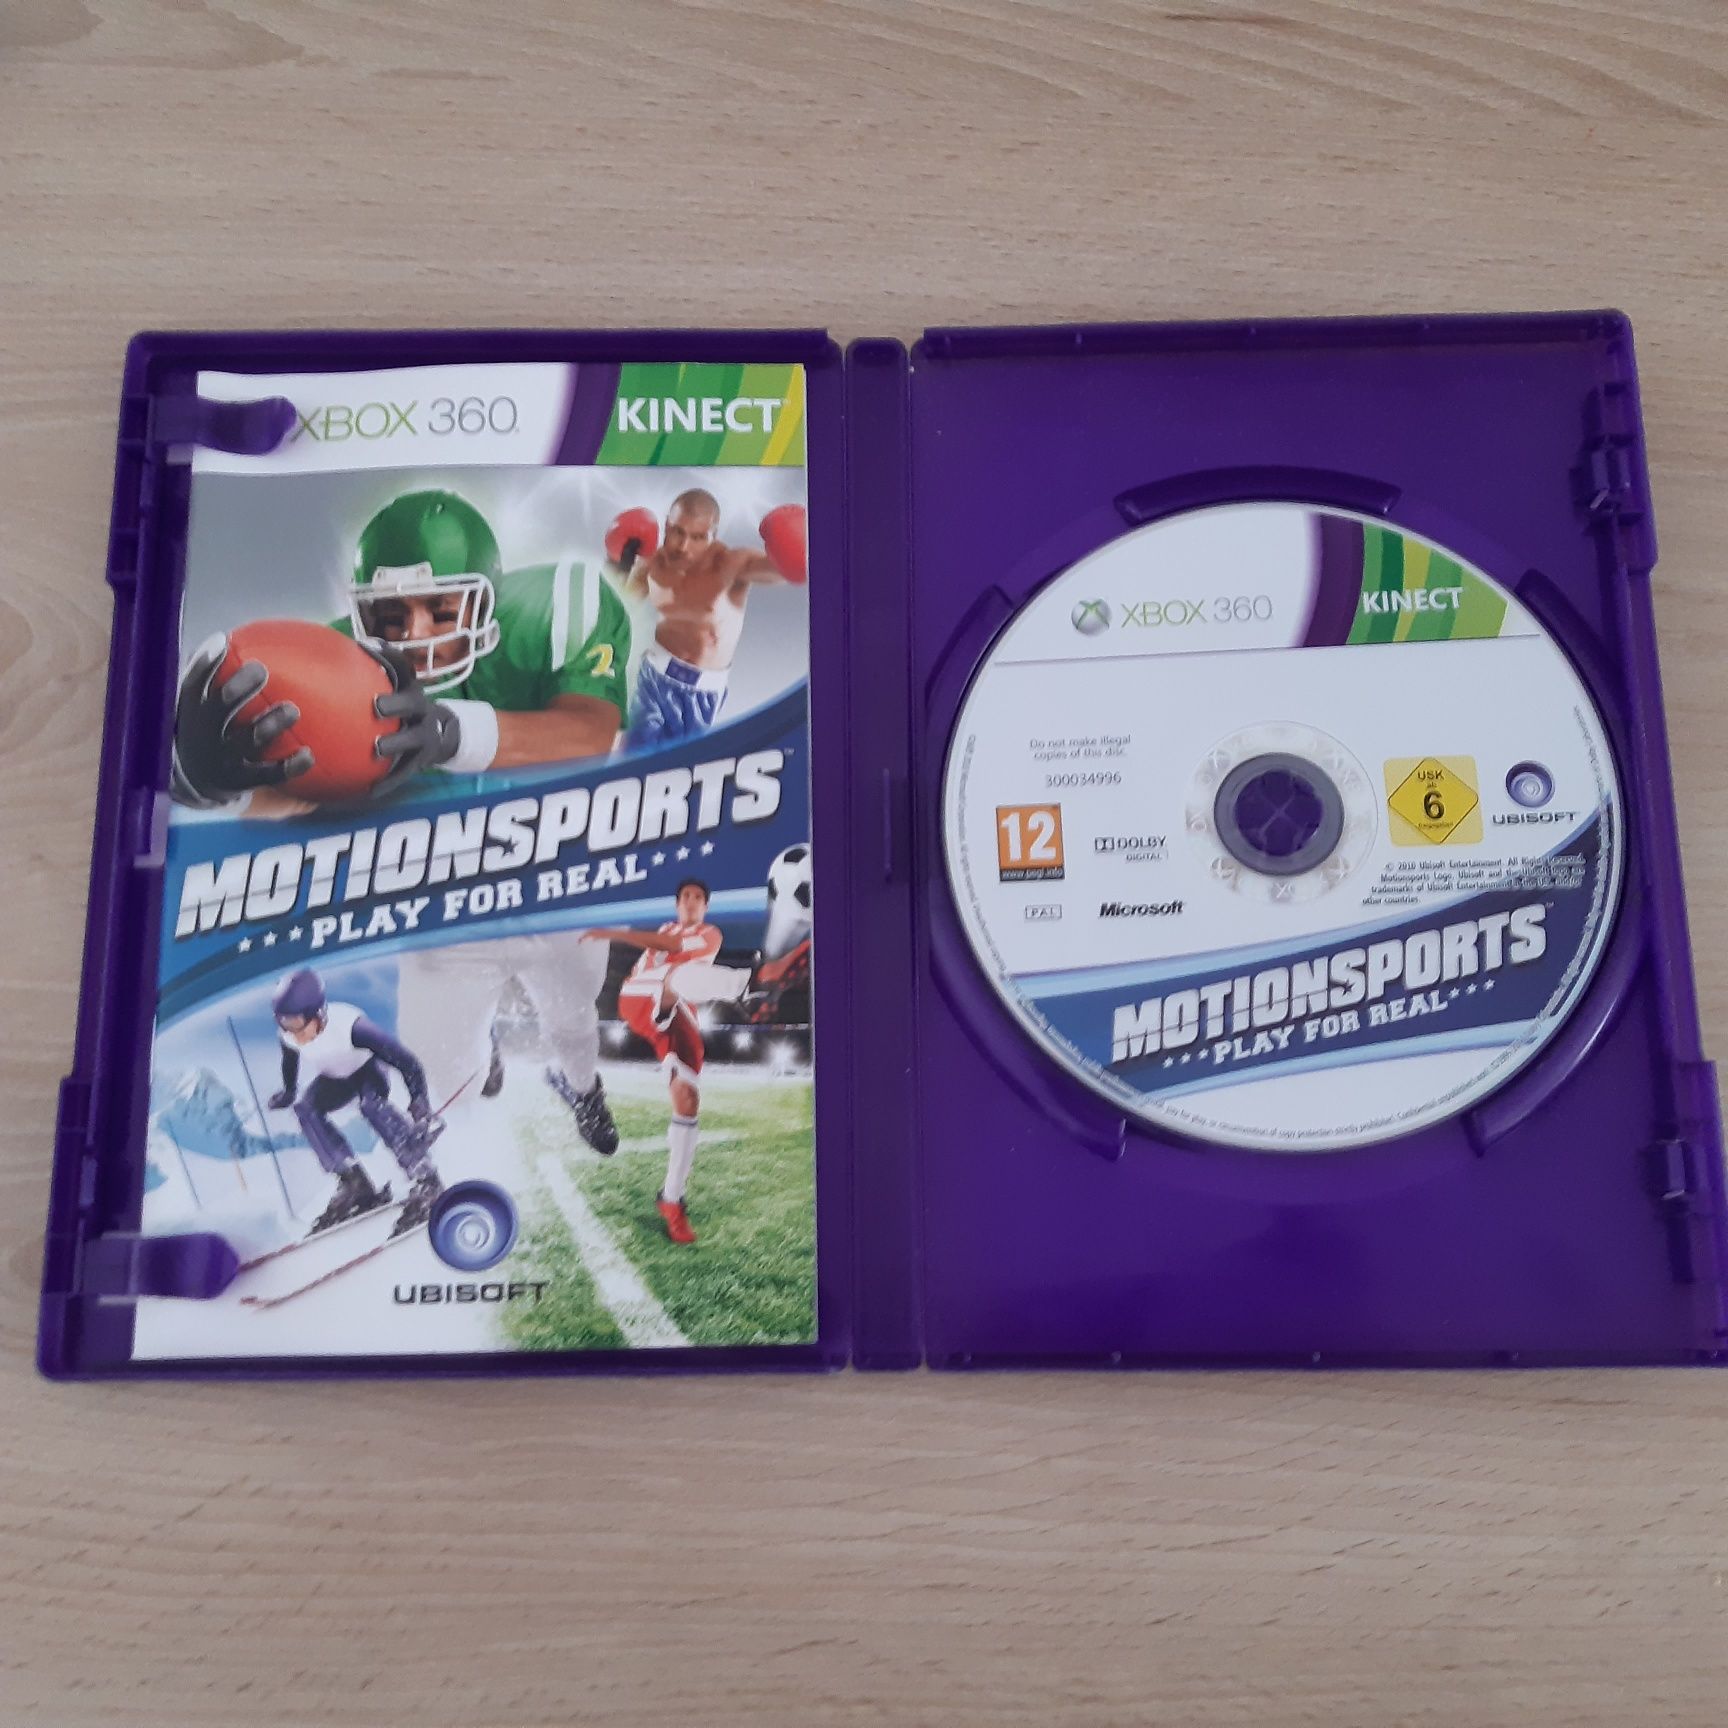 Gra Motionsports kinect xbox 360